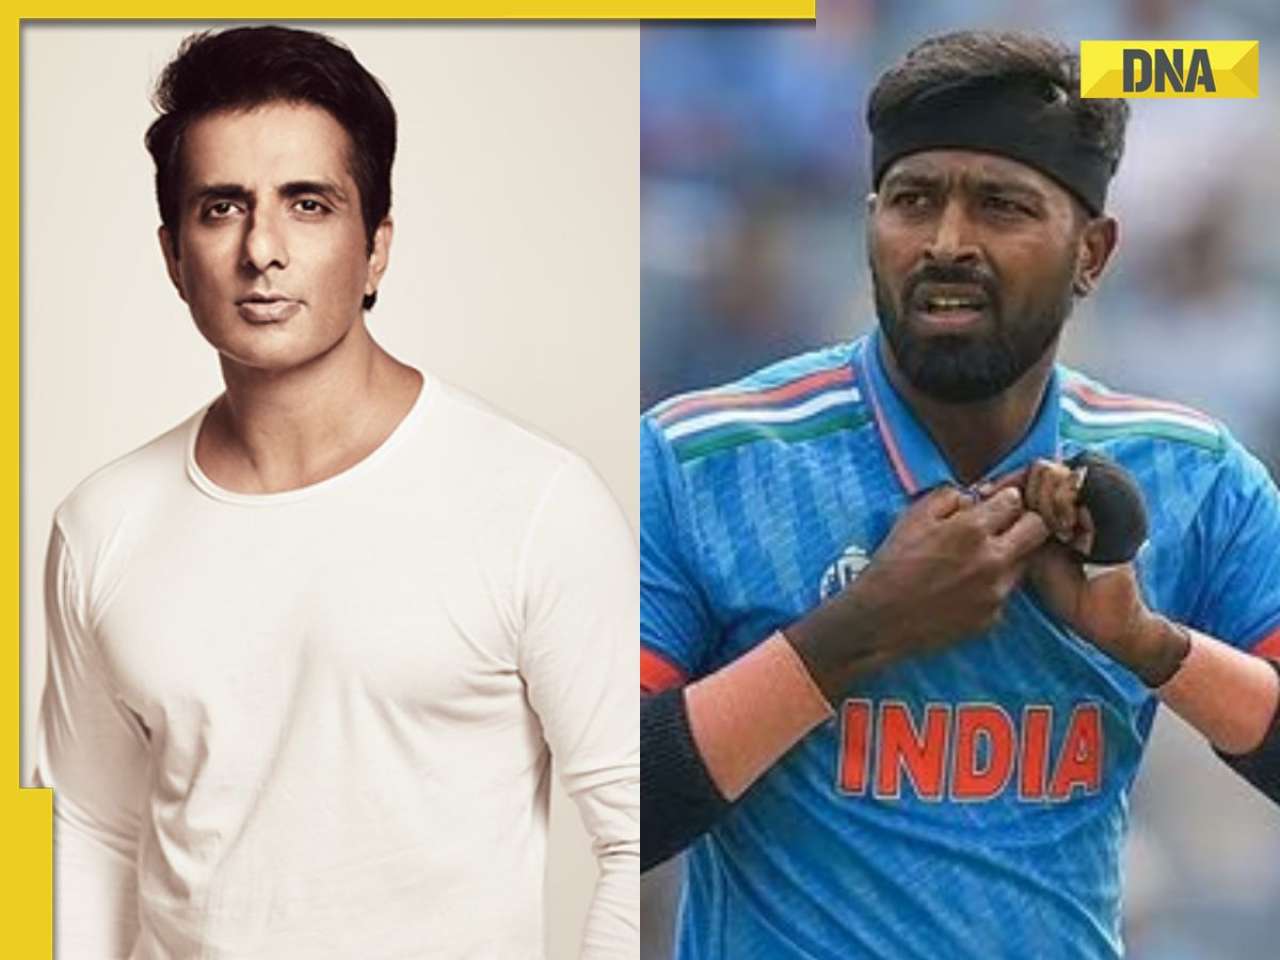 Sonu Sood slams cricket fans after Hardik Pandya is booed at Mumbai Indians' IPL game: 'It’s not they, it’s us who fail'